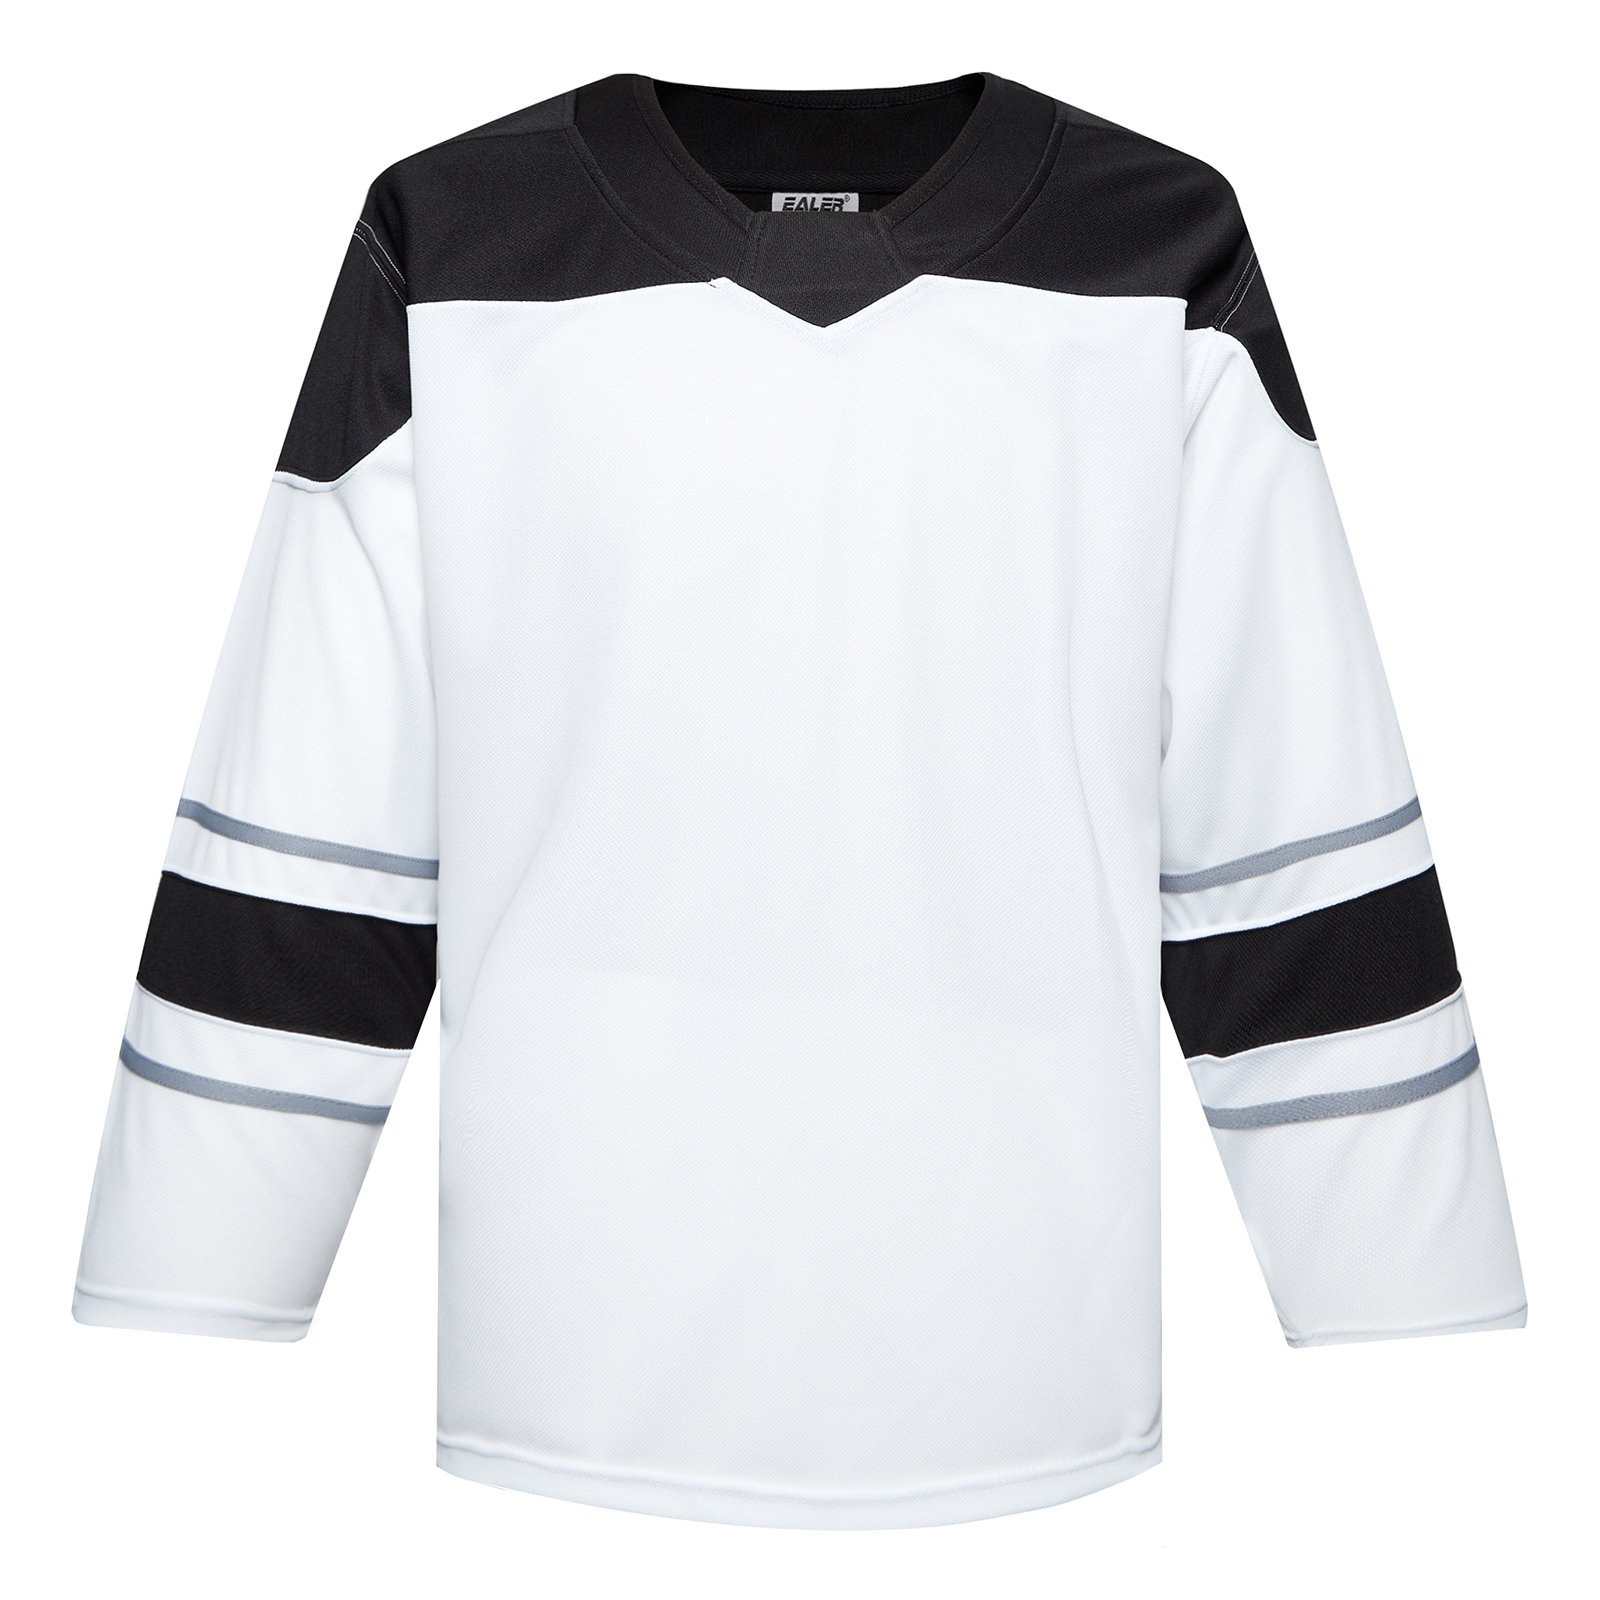 Senior and Junior Adult and Youth EALER H400 Series Blank Ice Hockey Practice Jersey League Jersey for Men and Boys 